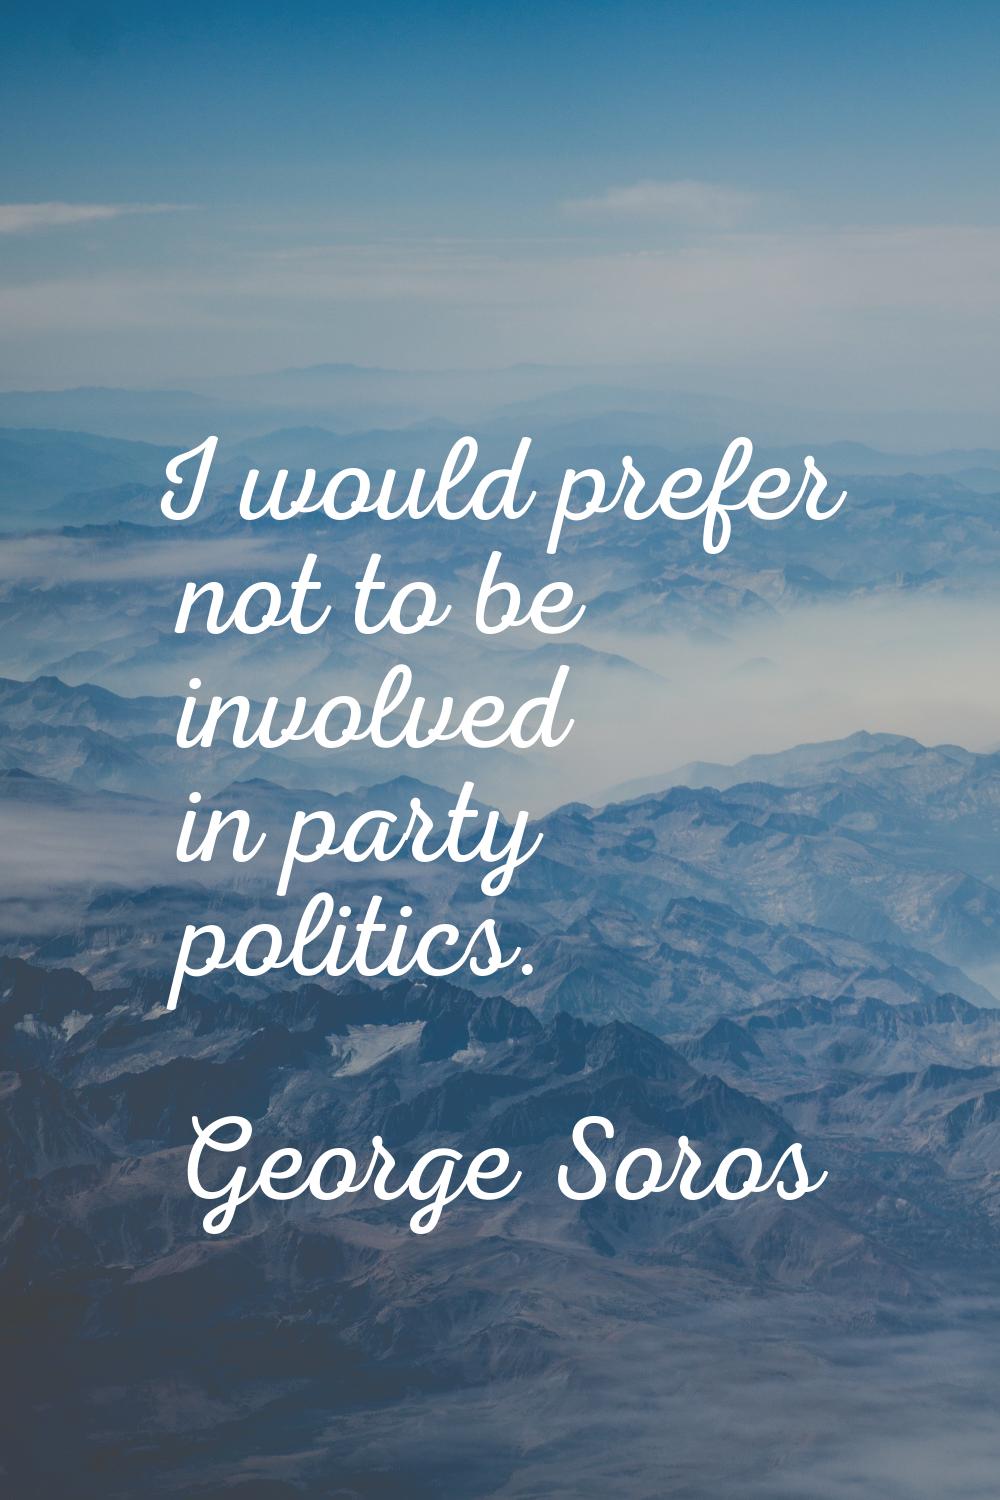 I would prefer not to be involved in party politics.